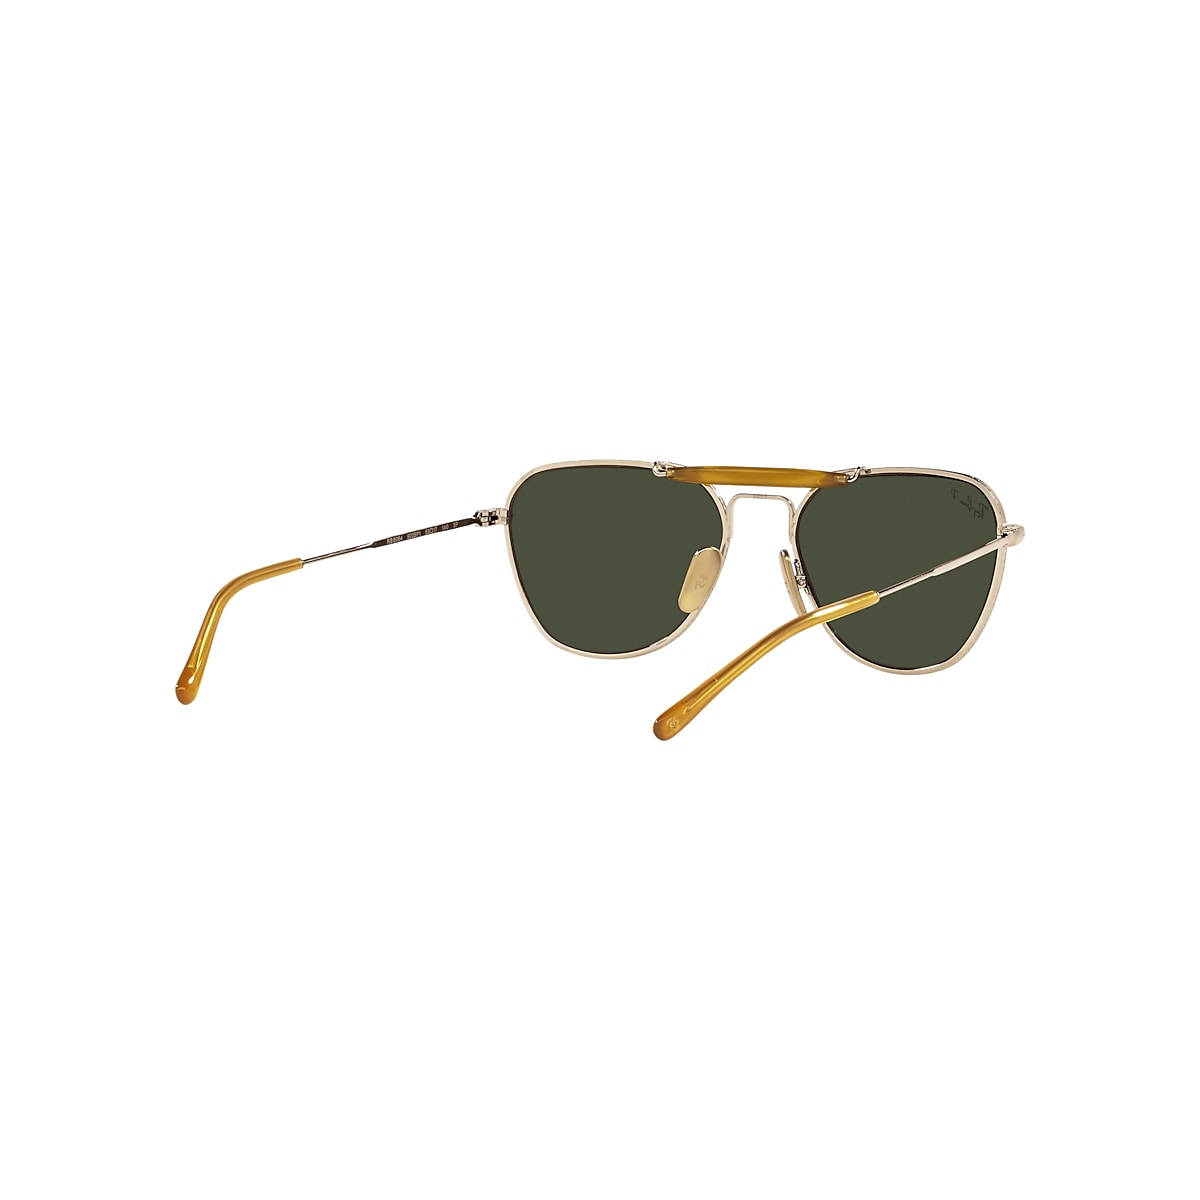 RB8064 TITANIUM Sunglasses in Gold and Dark Green - RB8064 | Ray 